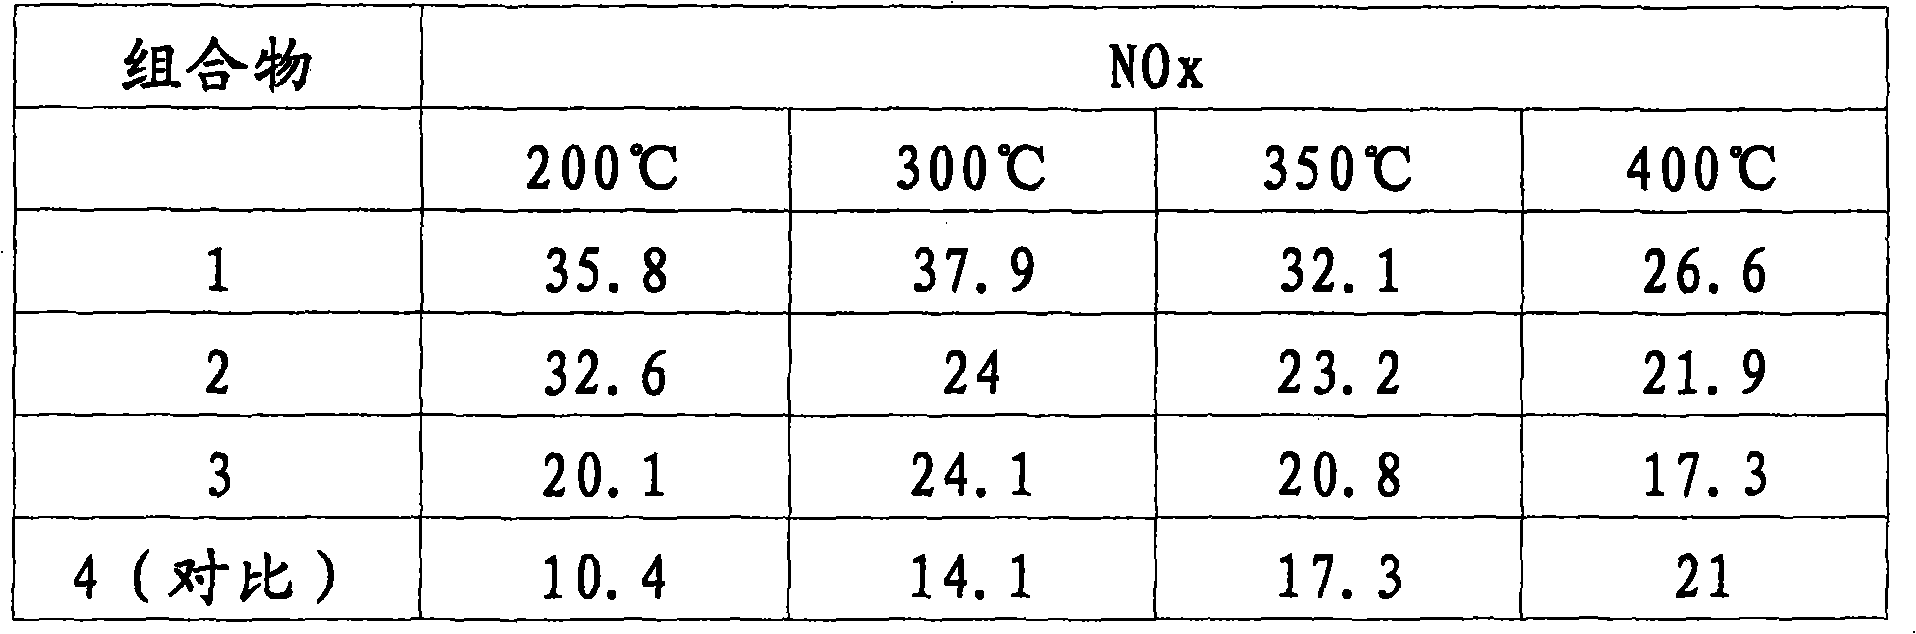 Method for treating a gas containing nitrogen oxides (NOx), using as nox trap a composition based on zirconium oxide and praseodymium oxide